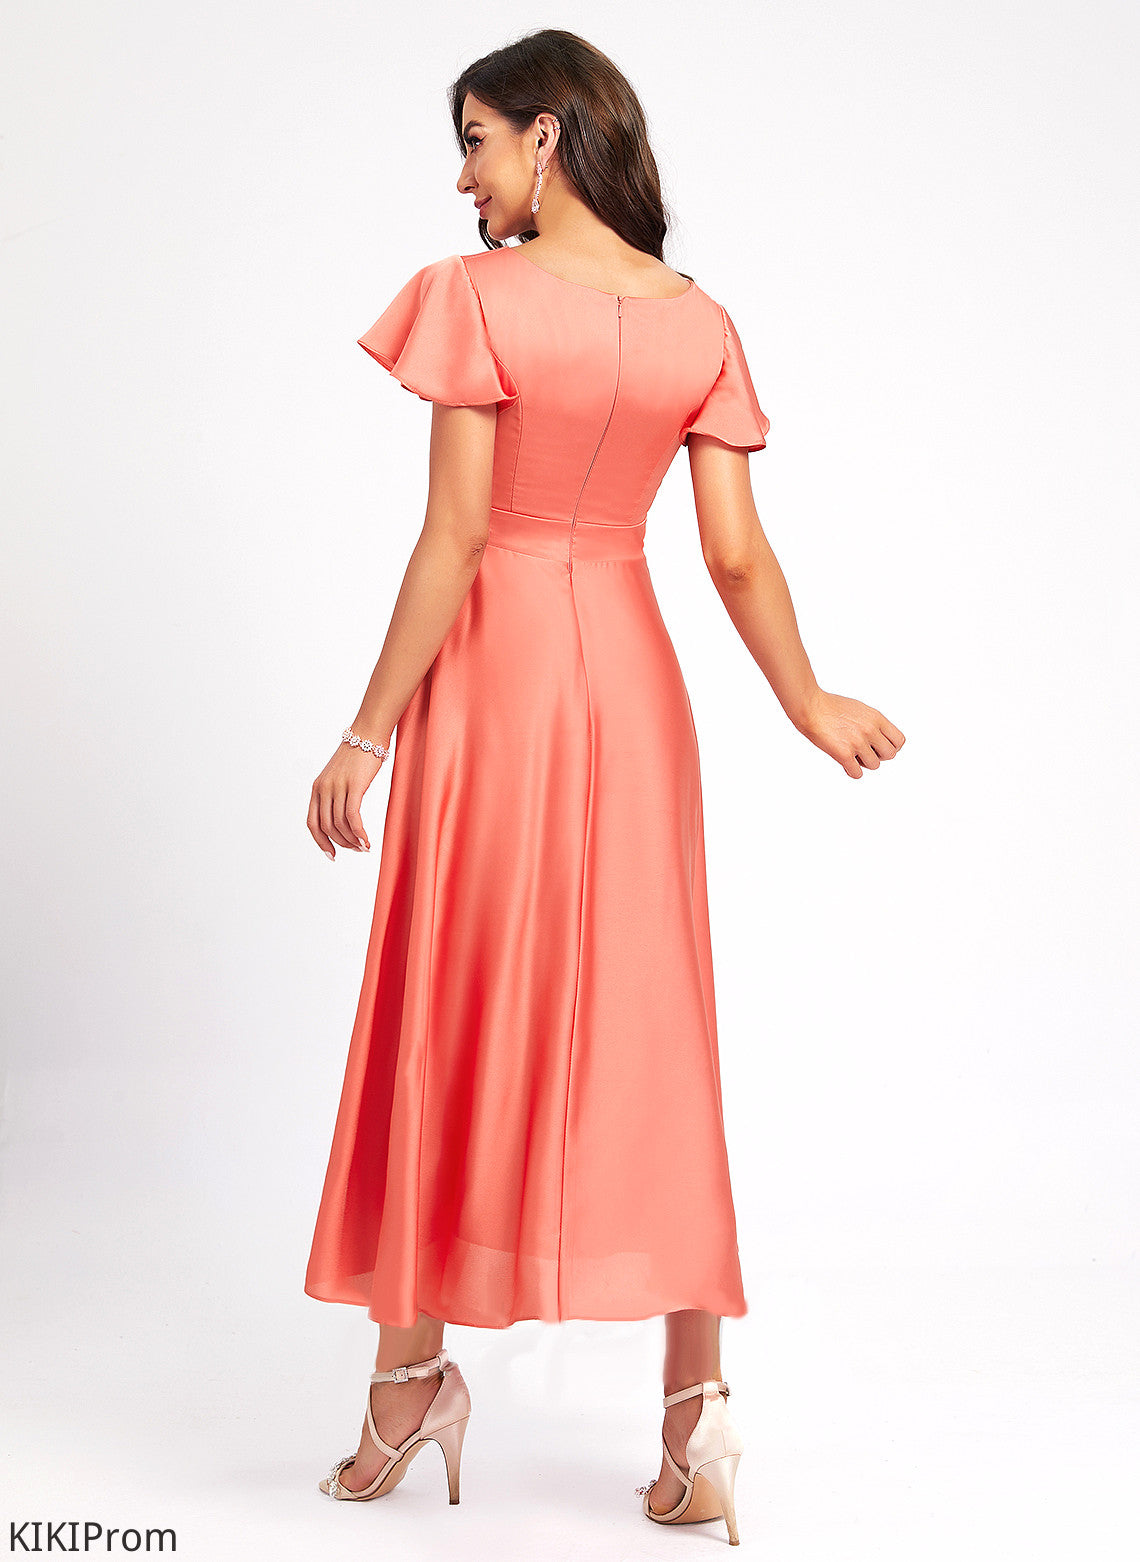 Neck Yaritza A-Line Polyester Cocktail Dresses Scoop Pleated Cocktail With Asymmetrical Dress